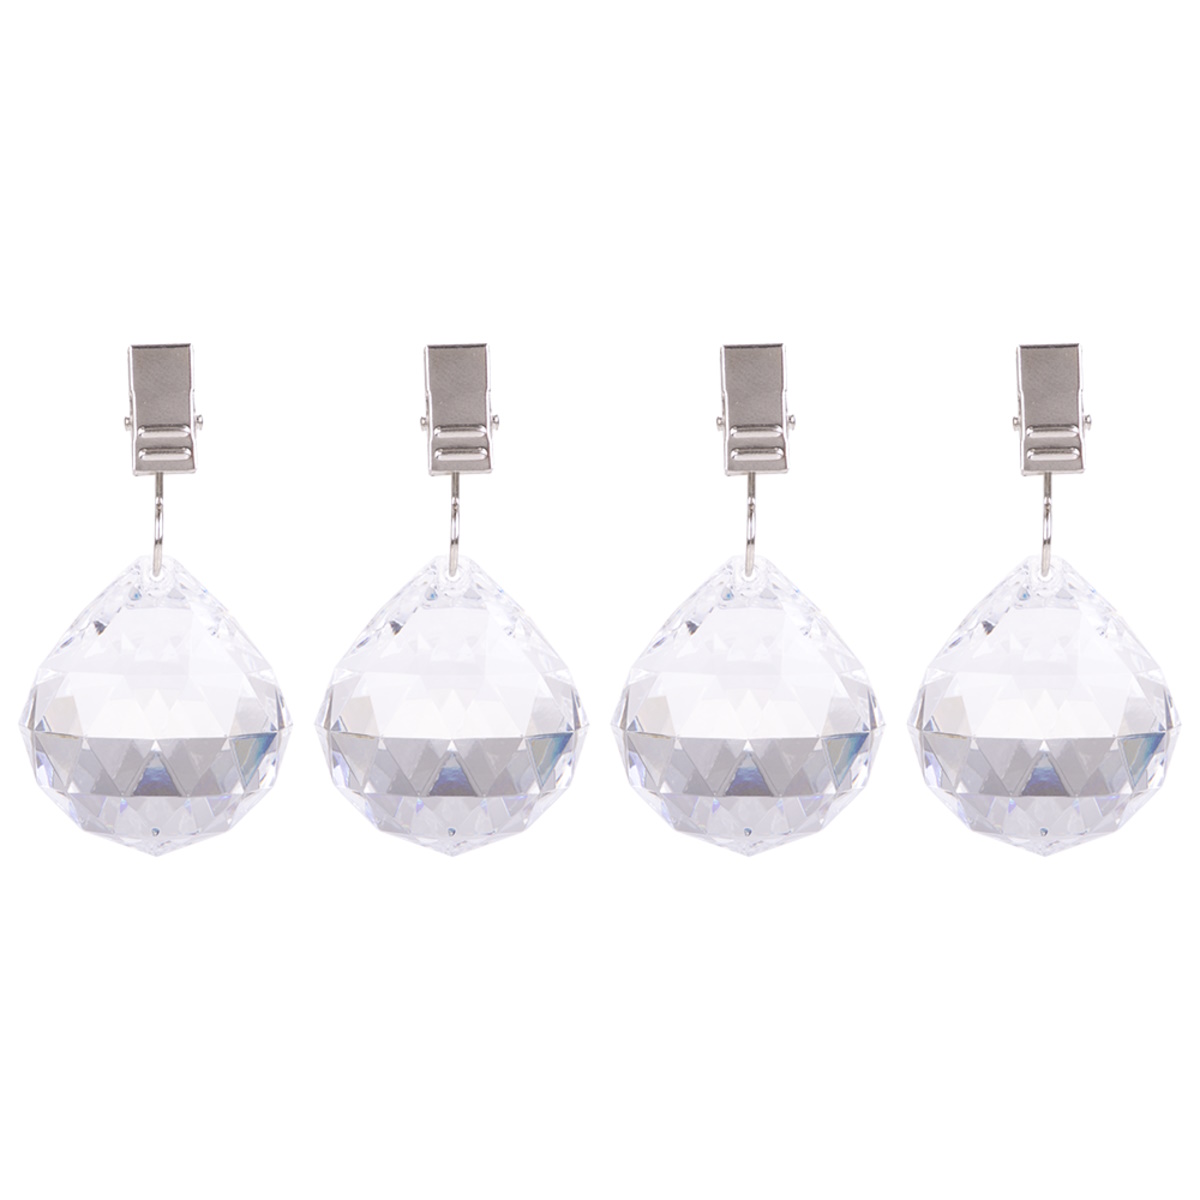 Pizzazz Acrylic Crystal Tablecloth Weights Set 4